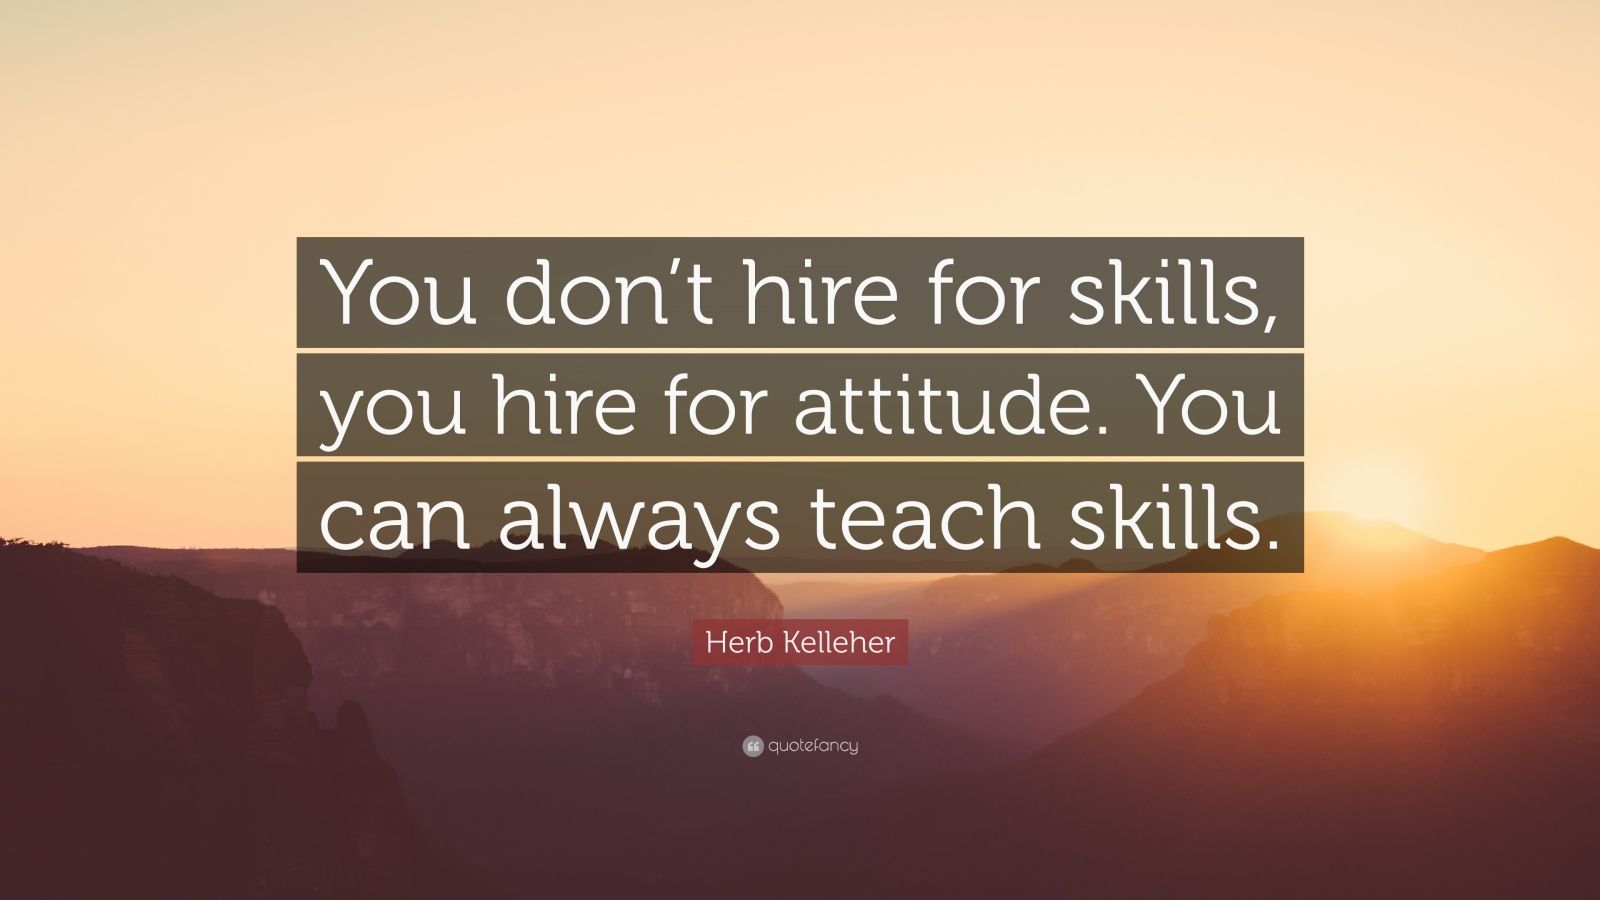 Herb Kelleher Quote: “You don’t hire for skills, you hire for attitude